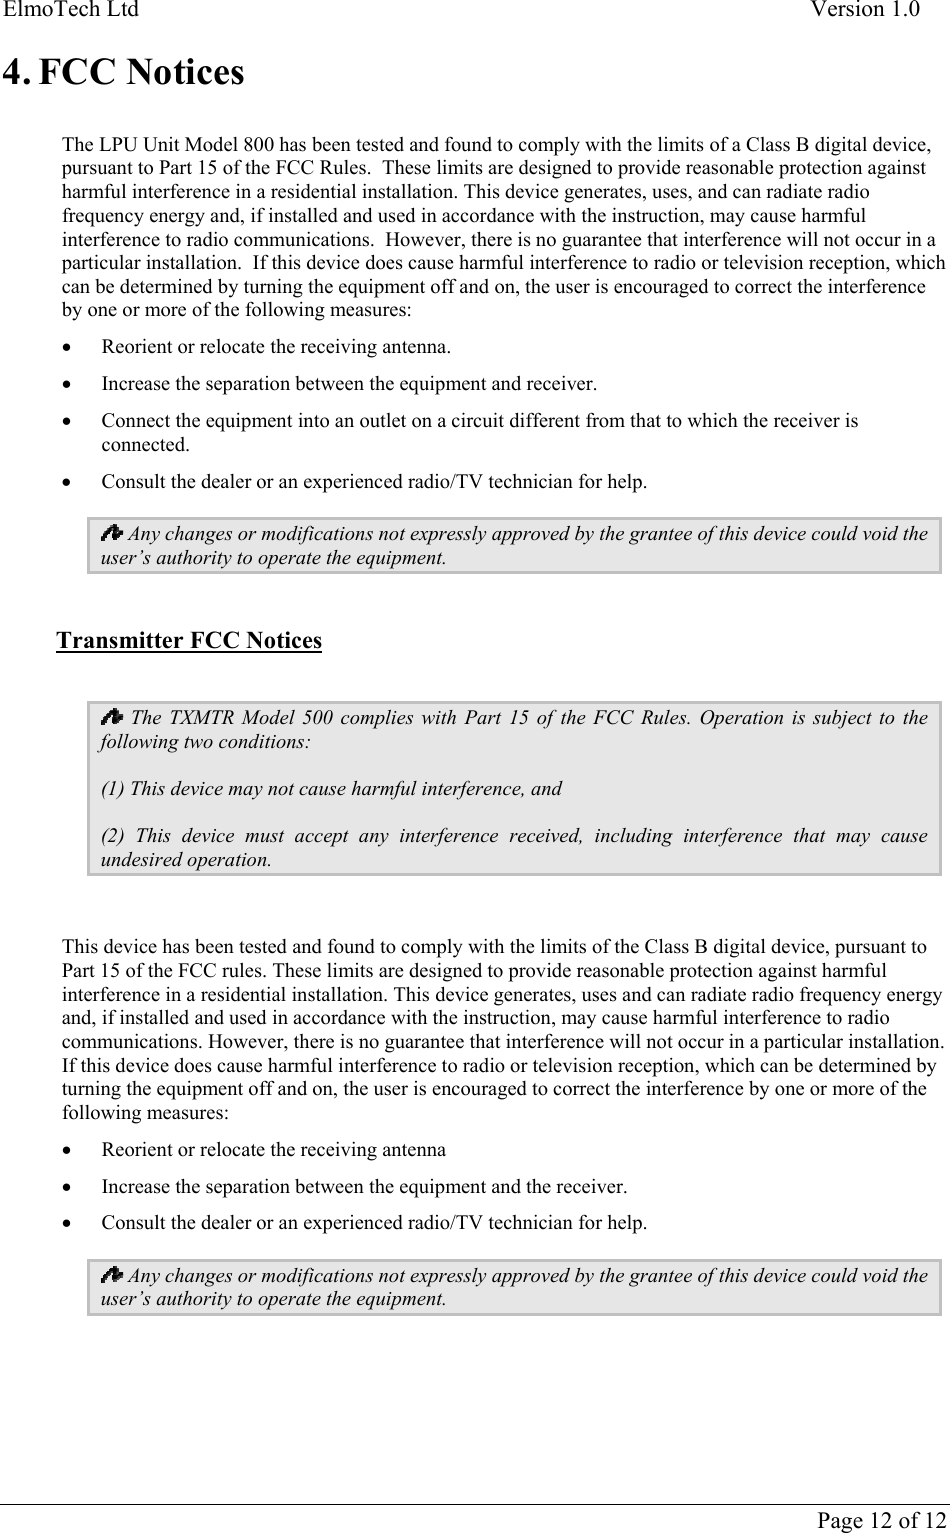 ElmoTech Ltd    Version 1.0      Page 12 of 12 4. FCC Notices  The LPU Unit Model 800 has been tested and found to comply with the limits of a Class B digital device, pursuant to Part 15 of the FCC Rules.  These limits are designed to provide reasonable protection against harmful interference in a residential installation. This device generates, uses, and can radiate radio frequency energy and, if installed and used in accordance with the instruction, may cause harmful interference to radio communications.  However, there is no guarantee that interference will not occur in a particular installation.  If this device does cause harmful interference to radio or television reception, which can be determined by turning the equipment off and on, the user is encouraged to correct the interference by one or more of the following measures: • Reorient or relocate the receiving antenna. • Increase the separation between the equipment and receiver. • Connect the equipment into an outlet on a circuit different from that to which the receiver is connected. • Consult the dealer or an experienced radio/TV technician for help.  Any changes or modifications not expressly approved by the grantee of this device could void the user’s authority to operate the equipment.  Transmitter FCC Notices   The TXMTR Model 500 complies with Part 15 of the FCC Rules. Operation is subject to the following two conditions: (1) This device may not cause harmful interference, and (2) This device must accept any interference received, including interference that may cause undesired operation.  This device has been tested and found to comply with the limits of the Class B digital device, pursuant to Part 15 of the FCC rules. These limits are designed to provide reasonable protection against harmful interference in a residential installation. This device generates, uses and can radiate radio frequency energy and, if installed and used in accordance with the instruction, may cause harmful interference to radio communications. However, there is no guarantee that interference will not occur in a particular installation. If this device does cause harmful interference to radio or television reception, which can be determined by turning the equipment off and on, the user is encouraged to correct the interference by one or more of the following measures: • Reorient or relocate the receiving antenna • Increase the separation between the equipment and the receiver. • Consult the dealer or an experienced radio/TV technician for help.  Any changes or modifications not expressly approved by the grantee of this device could void the user’s authority to operate the equipment.    